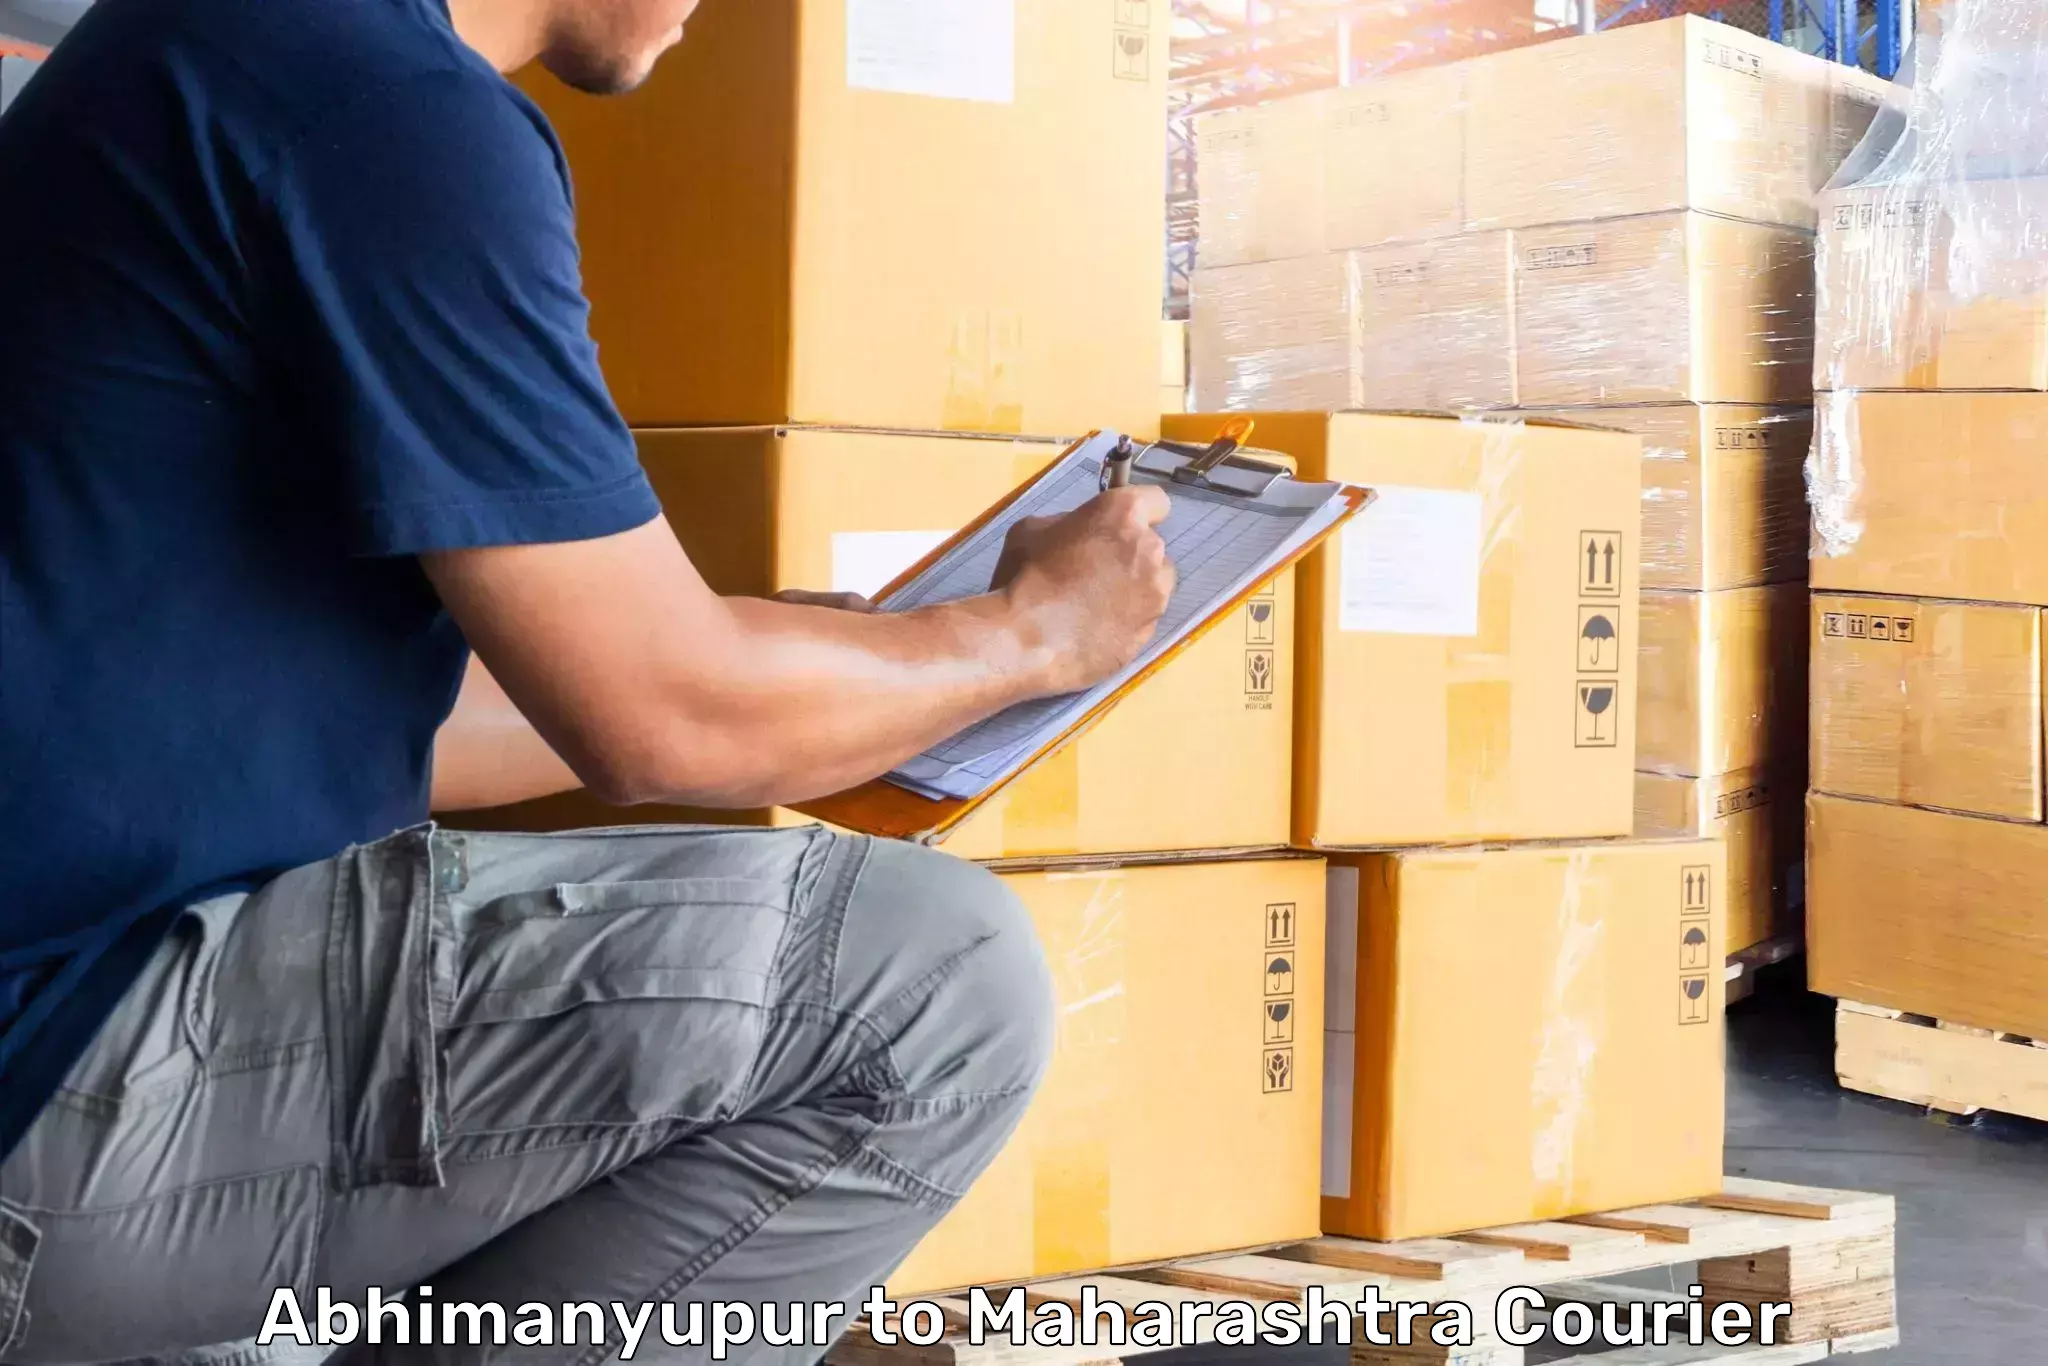 Baggage delivery technology Abhimanyupur to Maharashtra